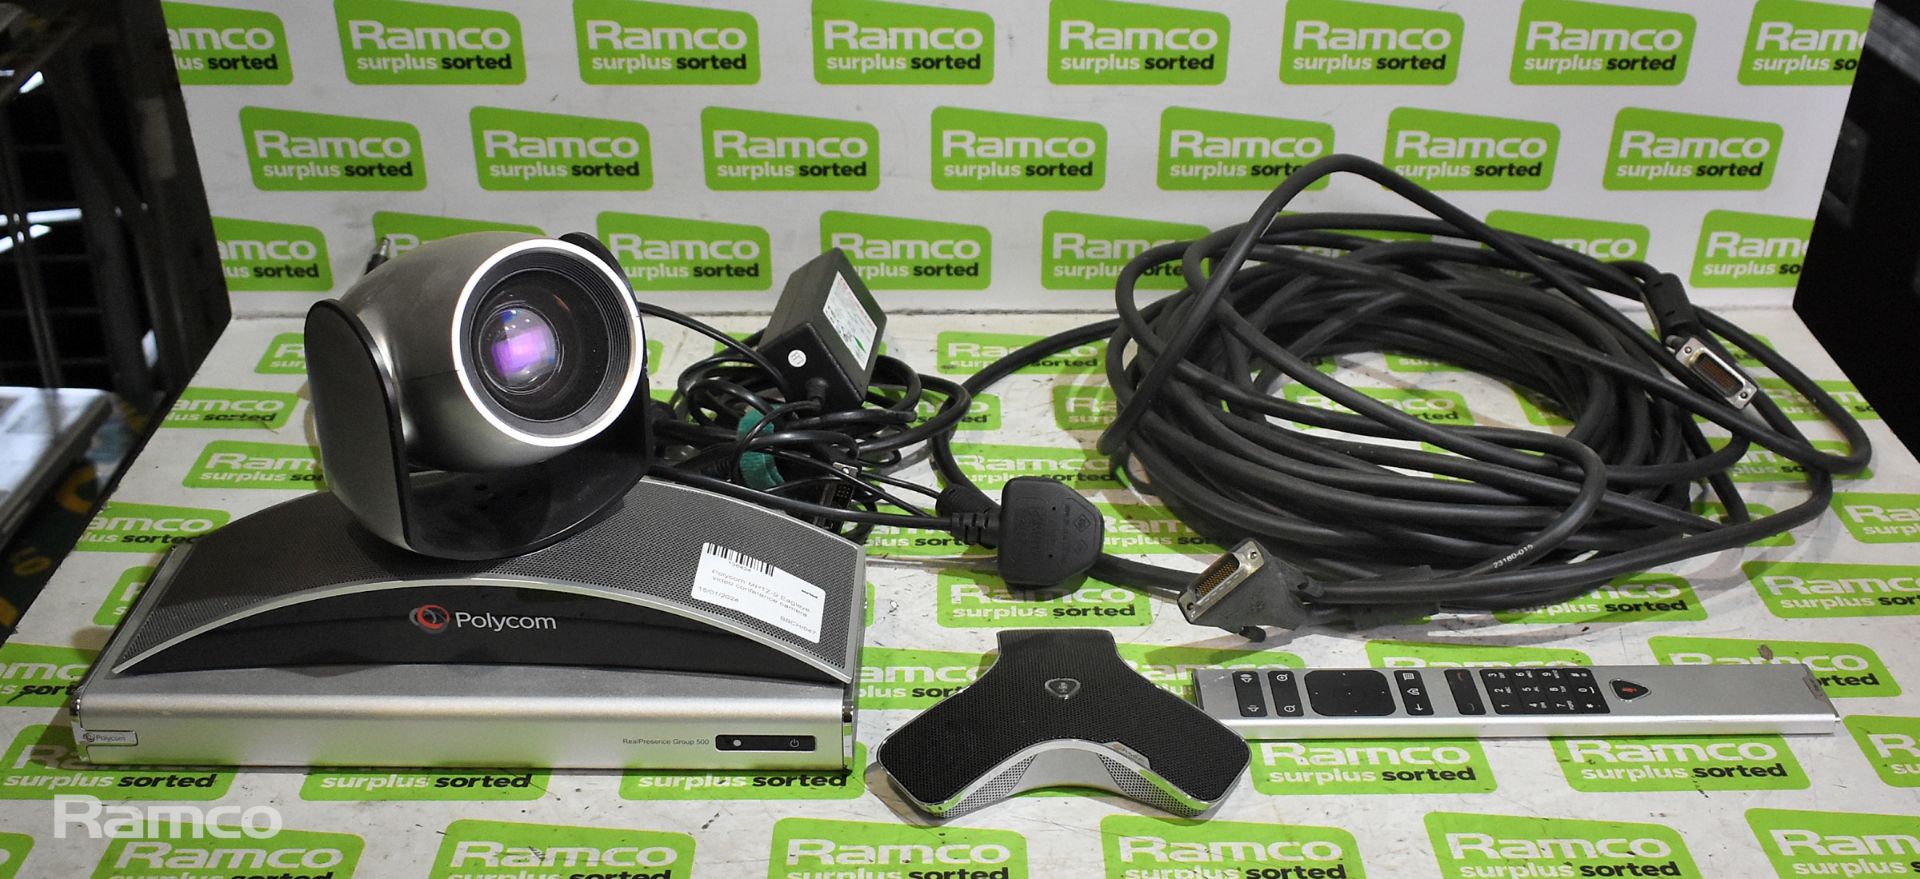 Polycom MPTZ-9 Eagle Eye video conference camera and group 500 conferencing system